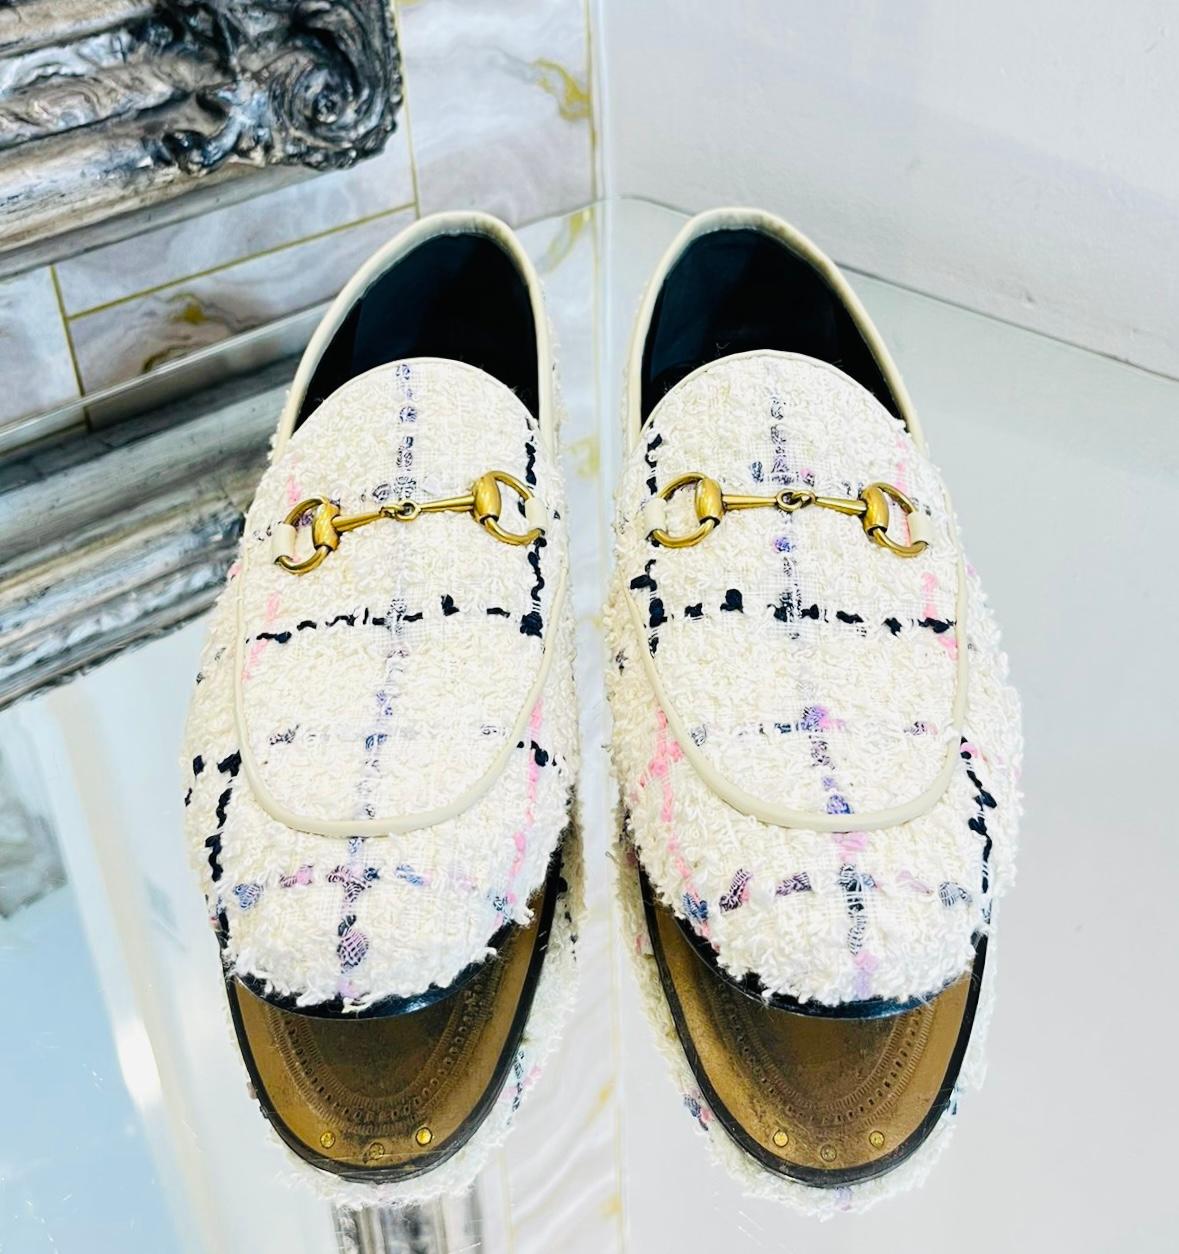 Gucci Jordaan Tweed Loafers

Ivory flats designed with pastel blue and pink stitching details.

Featuring the brand's signature gold Horsebit buckle to the front.

Slip-on style with short, block heel; leather lining and insoles. Rrp £690

Size –